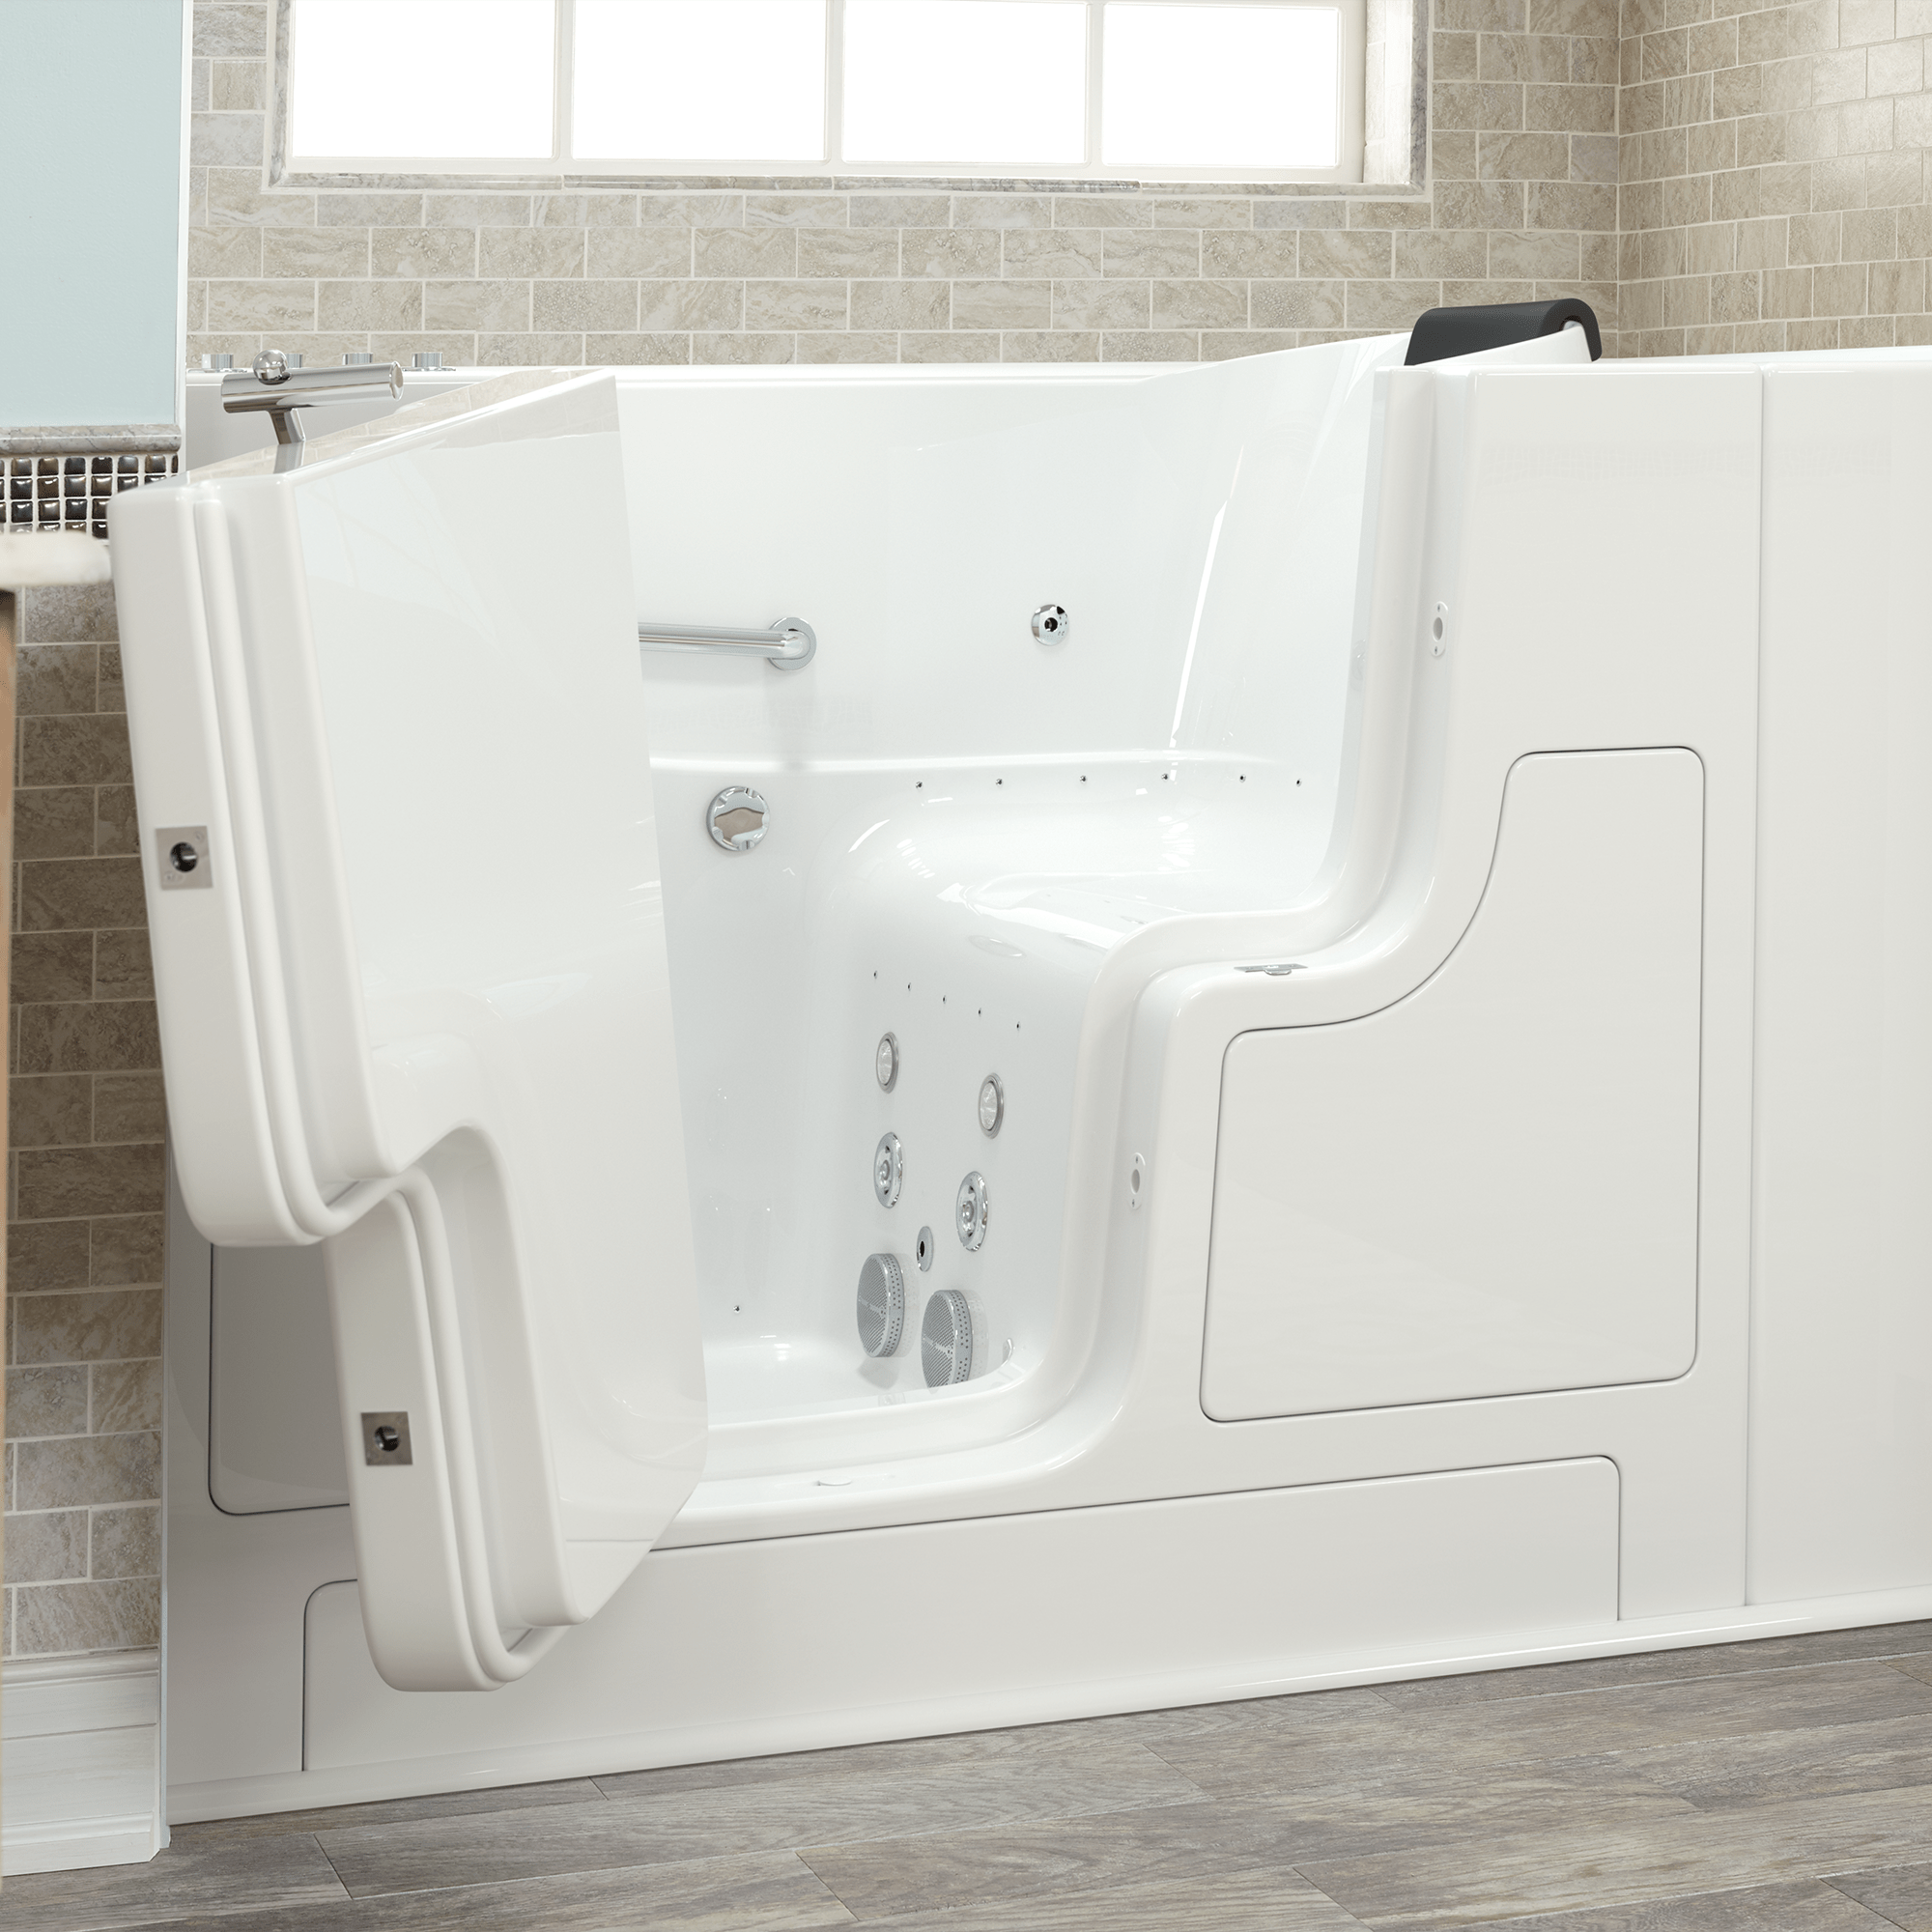 Gelcoat Premium Series 30 x 52  Inch Walk in Tub With Combination Air Spa and Whirlpool Systems   Left Hand Drain WIB WHITE